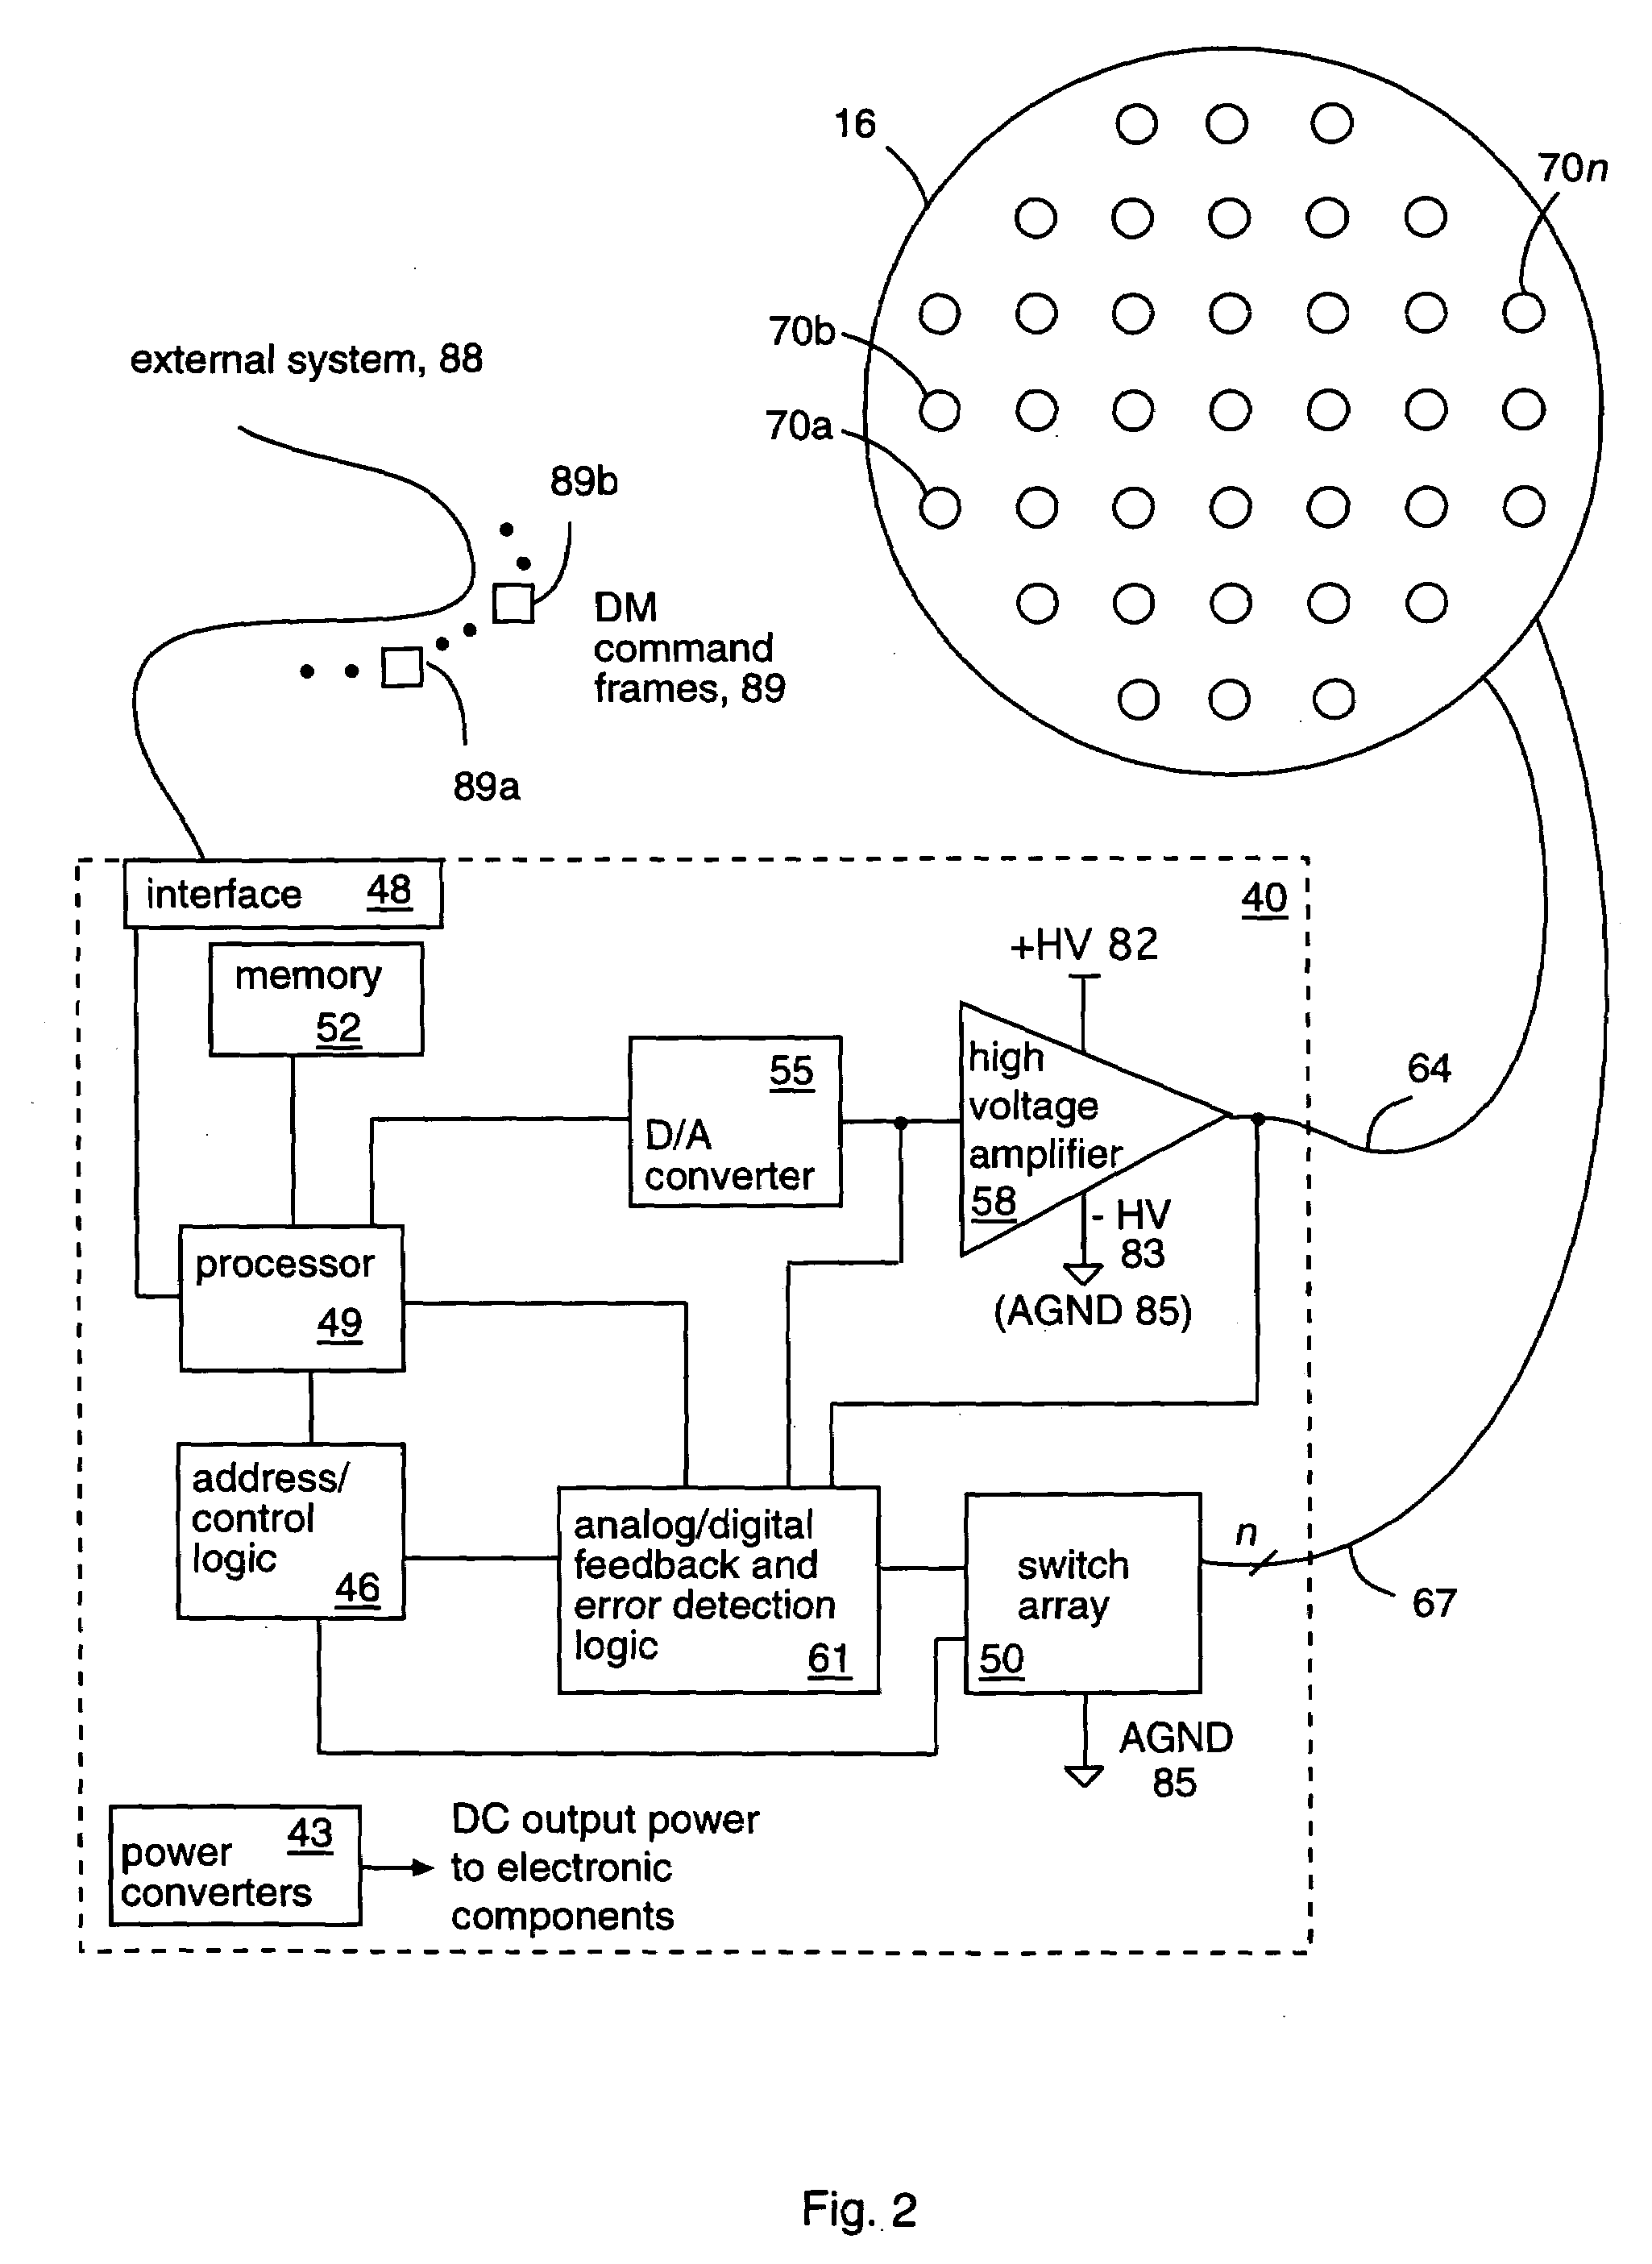 Multiplexer hardware and software for control of a deformable mirror